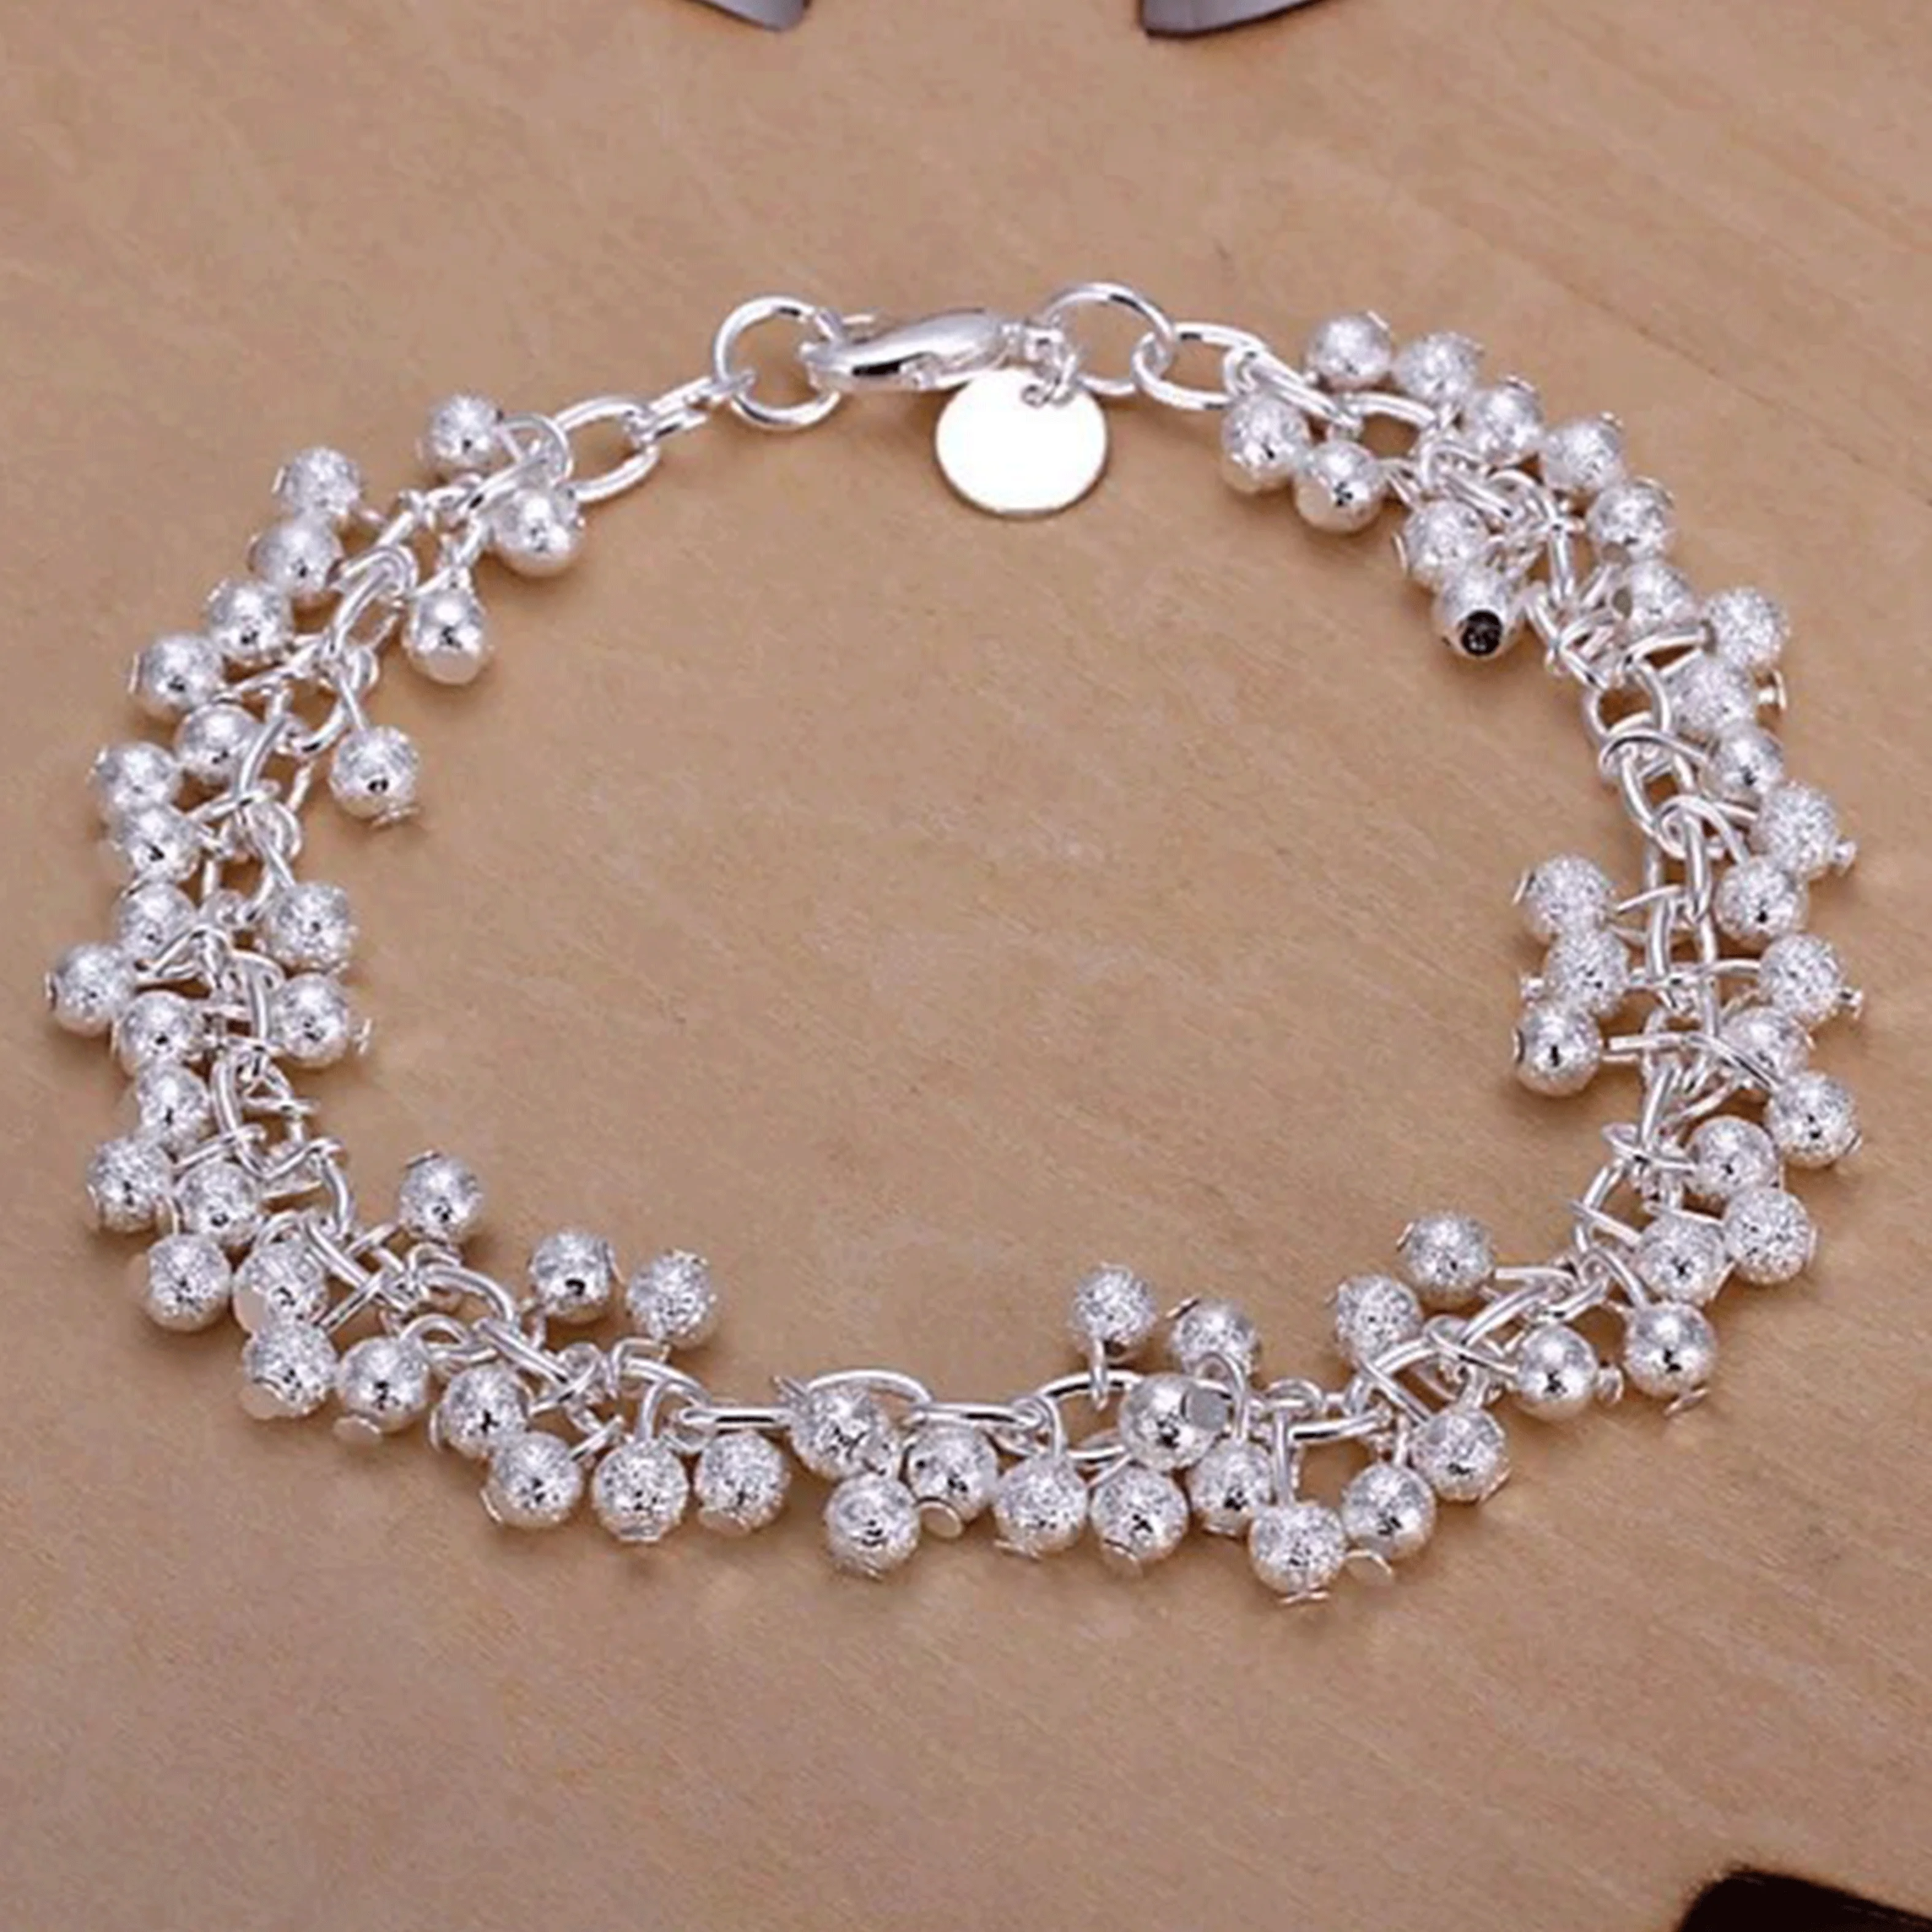 Fashion Popular Product 925 Sterling Silver Jewelry Charm Women Chain Beads Grapes Bracelet Free Shipping Hot Sale Cute Gift